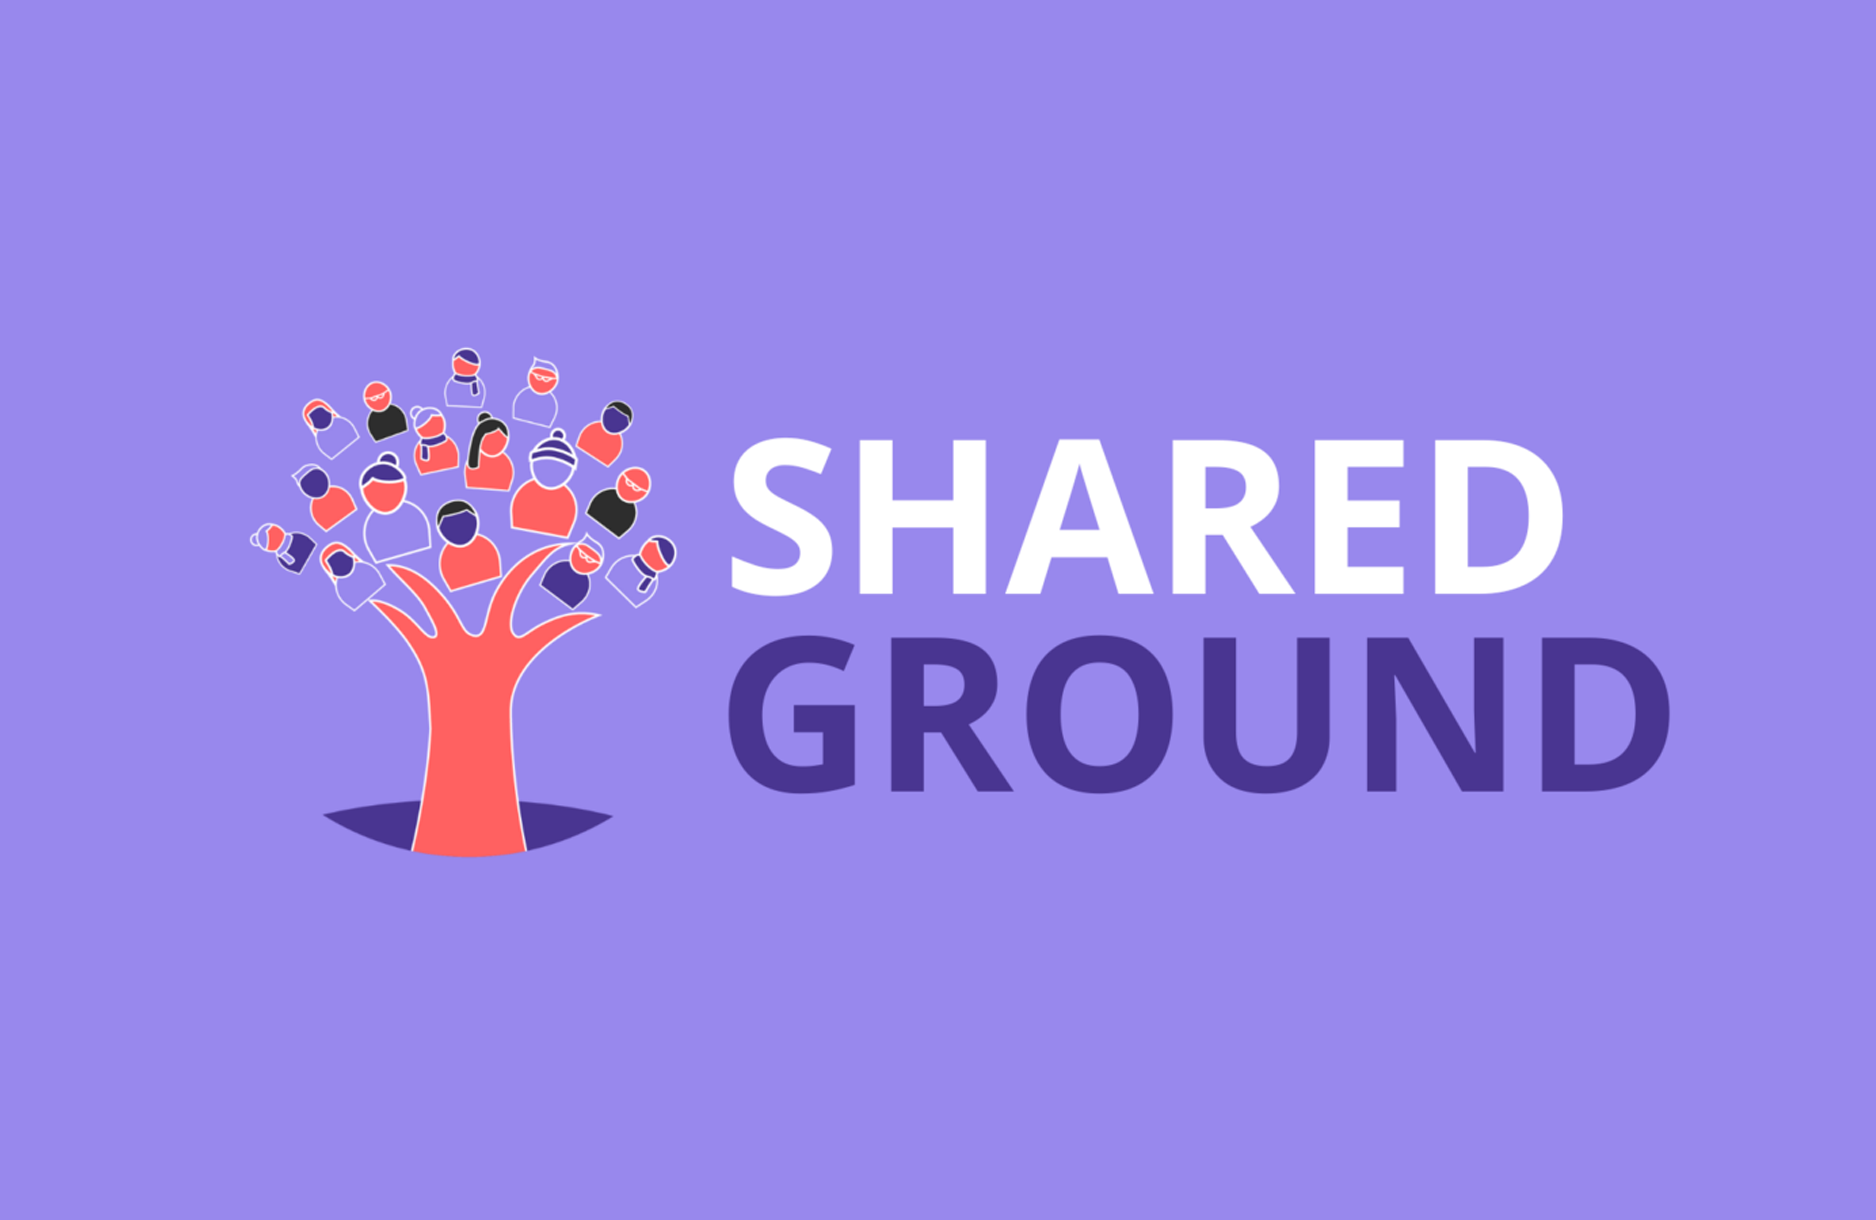 The Shared Ground logo, showing a computer illustrated tree that blossoms into a range of people.